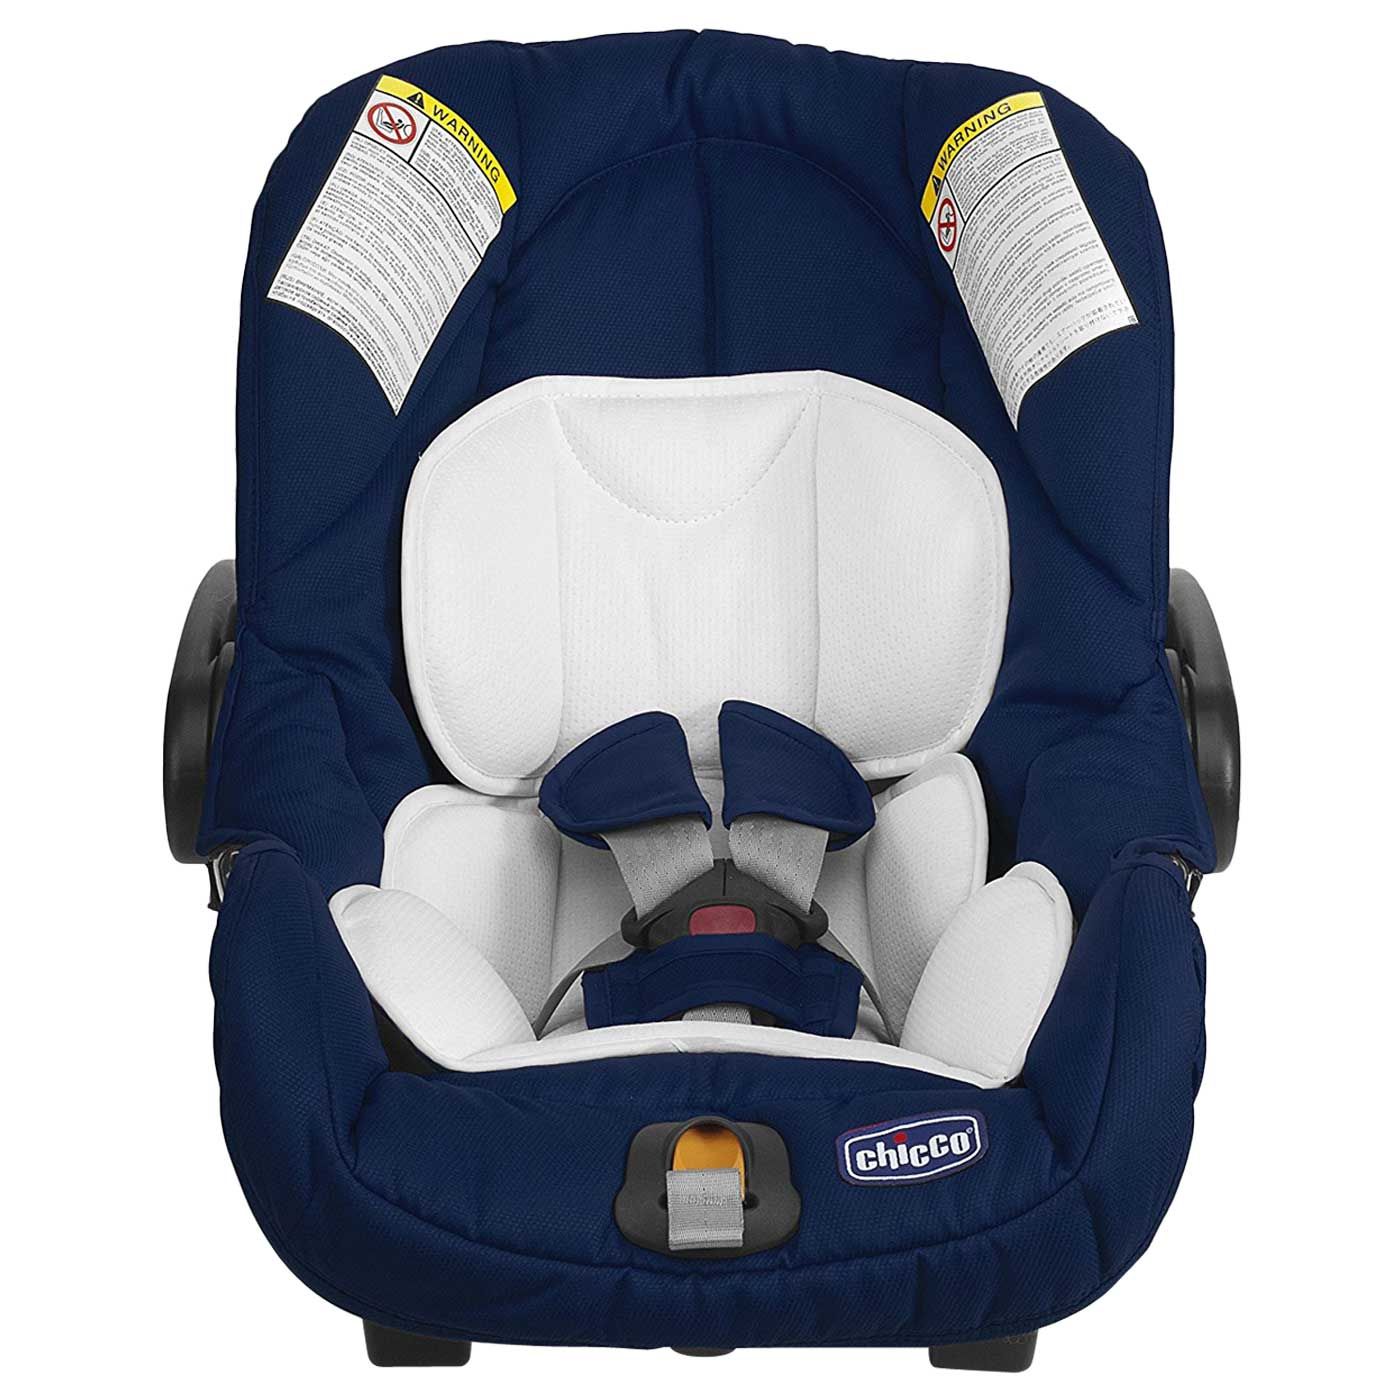 Chicco Keyfit Carseat